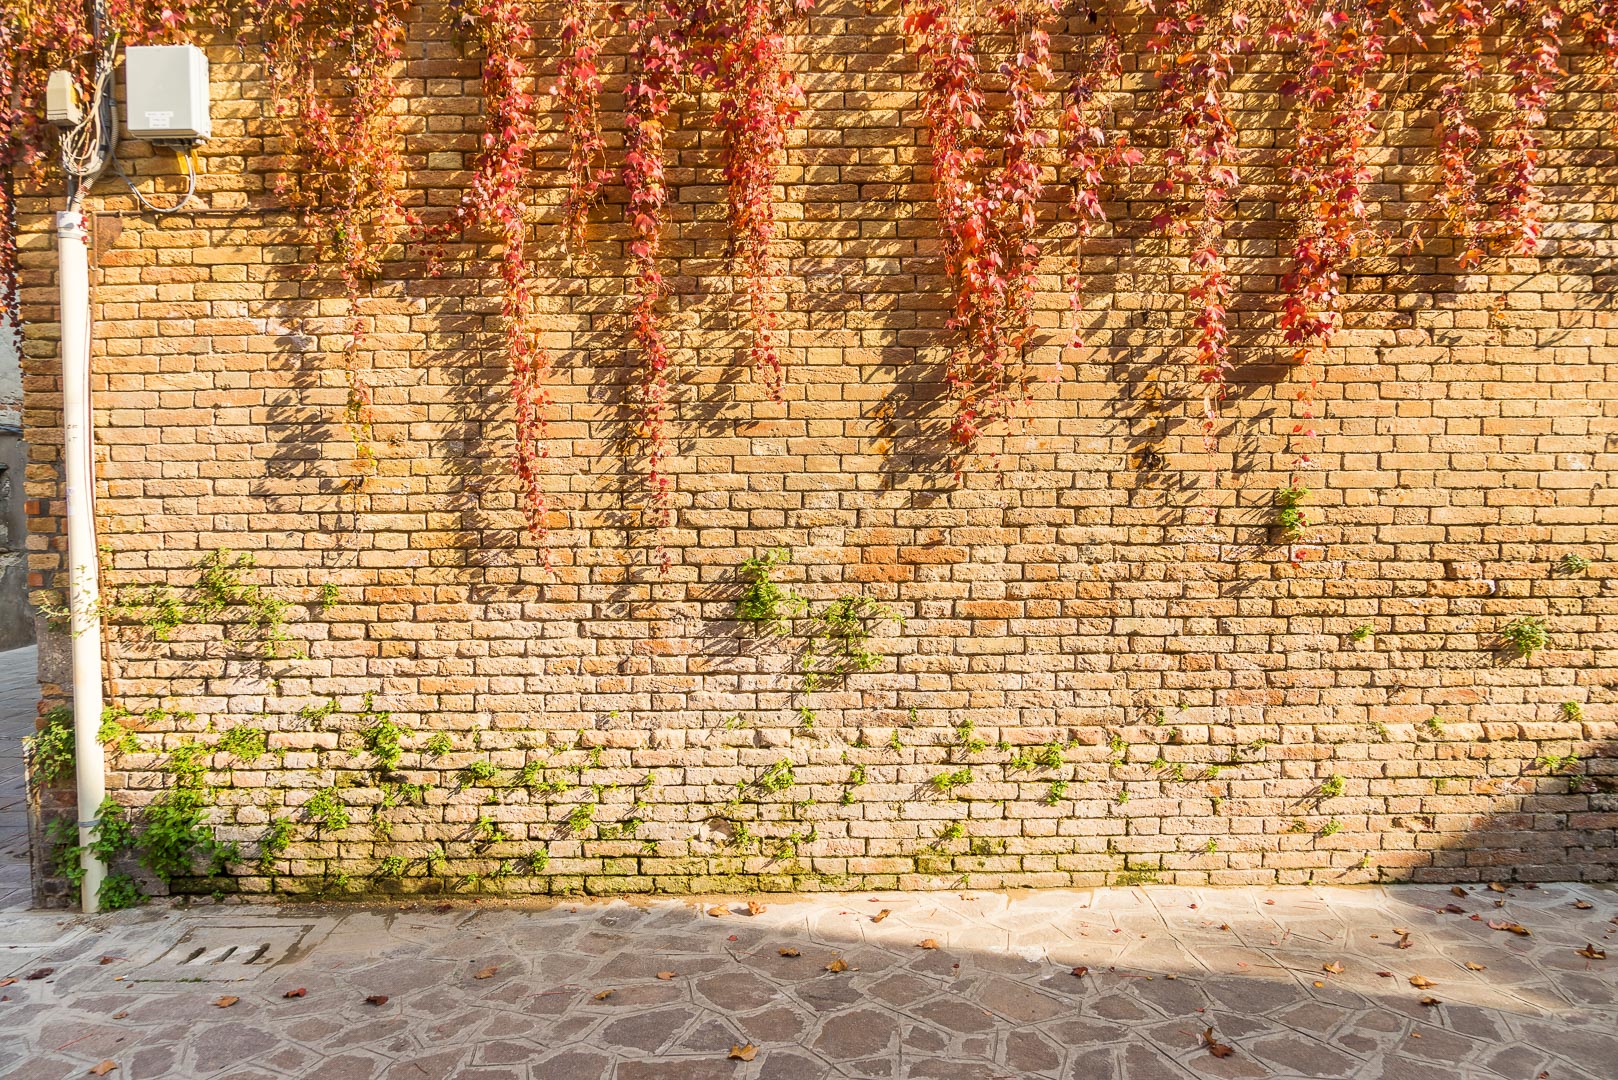 Backplate • ID: 9819 • HDRI Haven - Street With Brick Wall Covered With Leaves